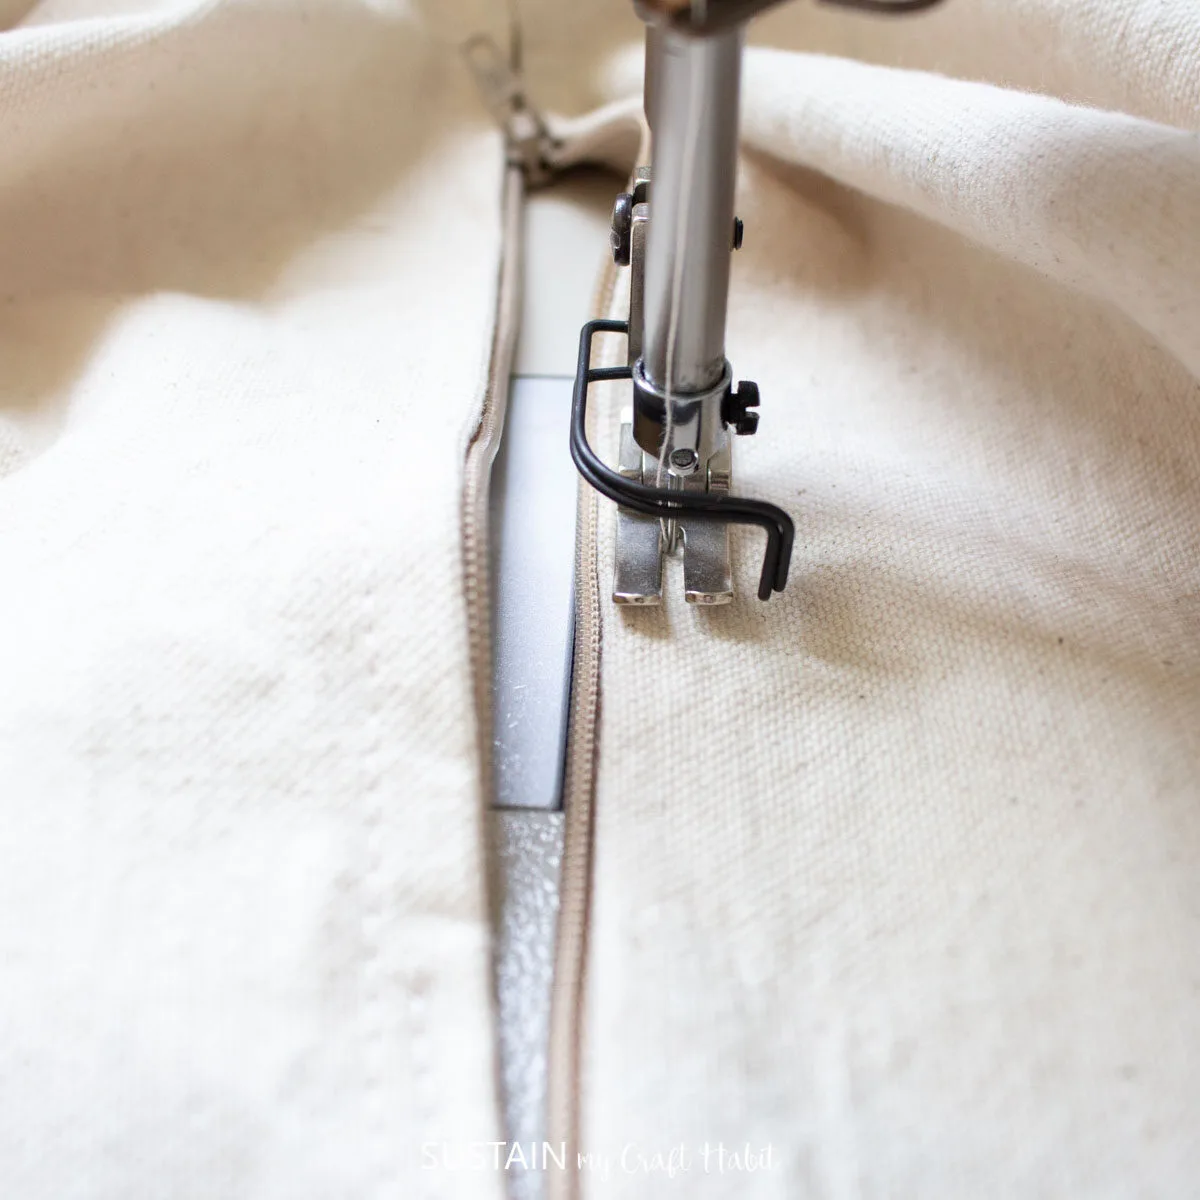 Sewing the zipper through all layers for the fabric canvas.